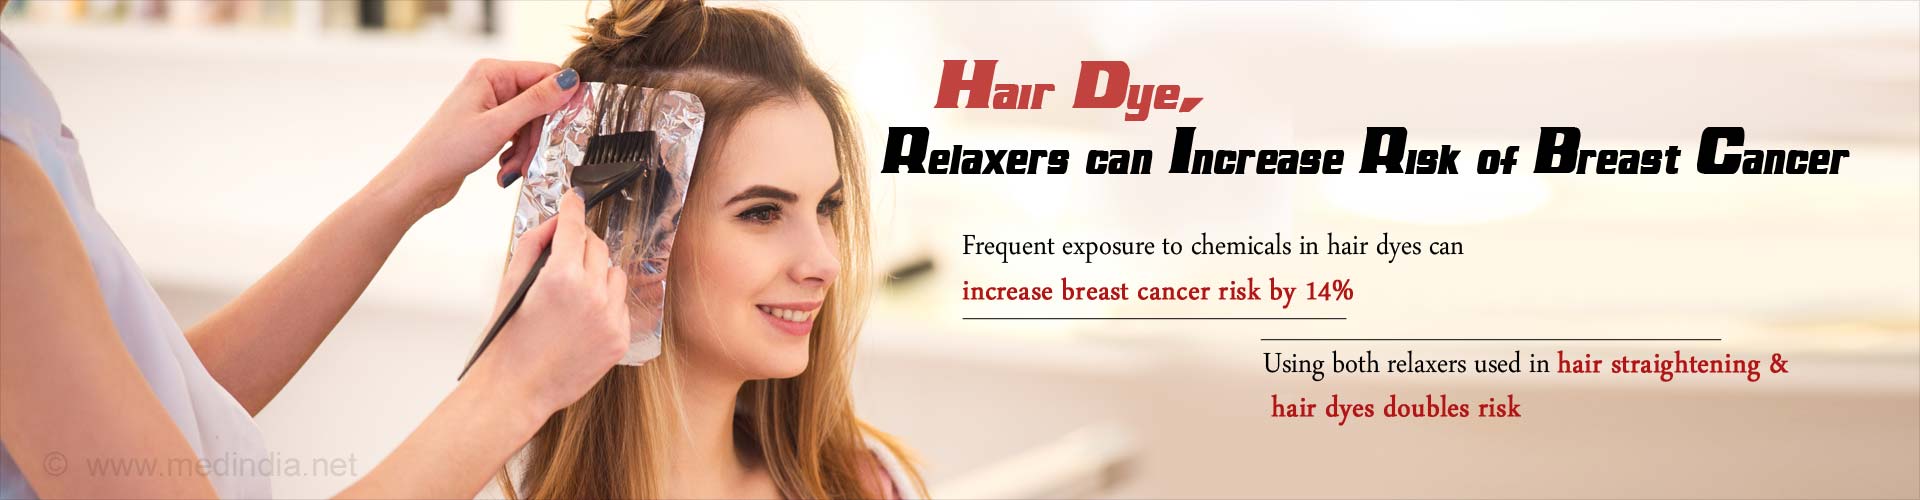 Hair dye, relaxers can increase risk of breast cancer
- Frequent exposure to chemicals in hair dyes can increase breast cancer risk by 14%
- Using both relaxers used in hair straightening & fair dyes doubles risk